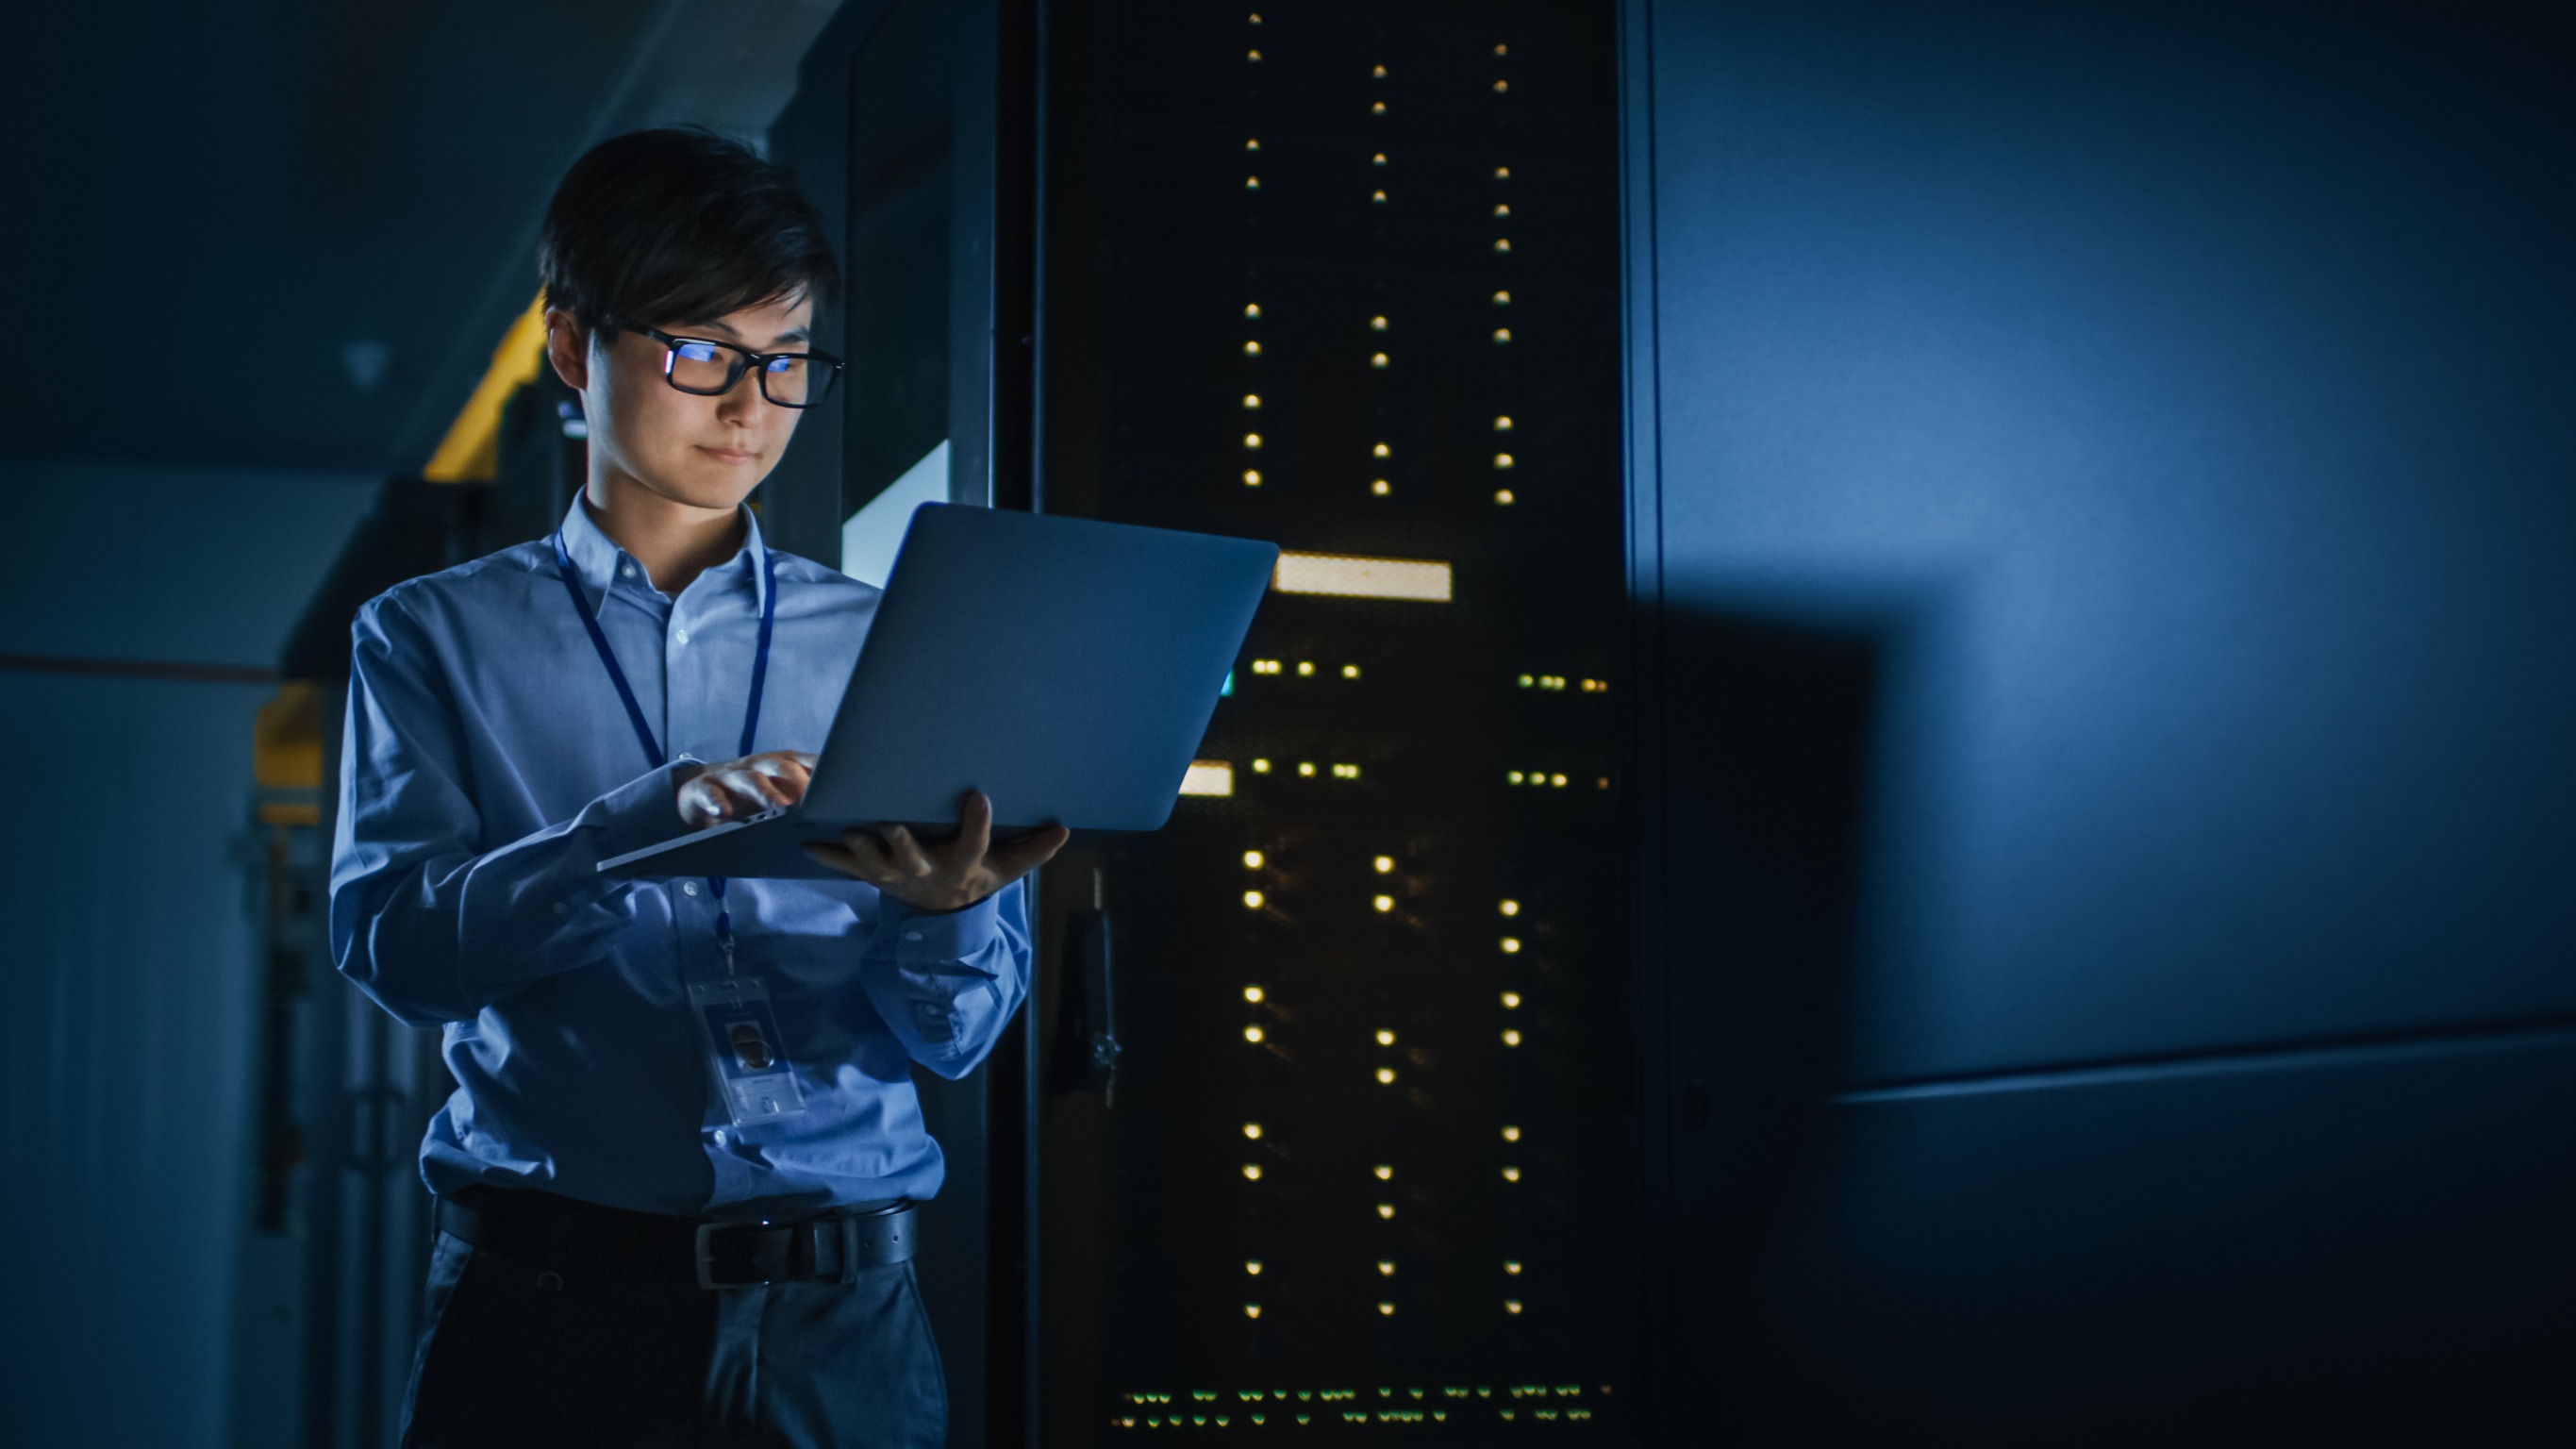 In Dark Data Center: Male IT Specialist Stands Beside the Row of Operational Server Racks, Uses Laptop for Maintenance. Concept for Cloud Computing, Artificial Intelligence, Supercomputer